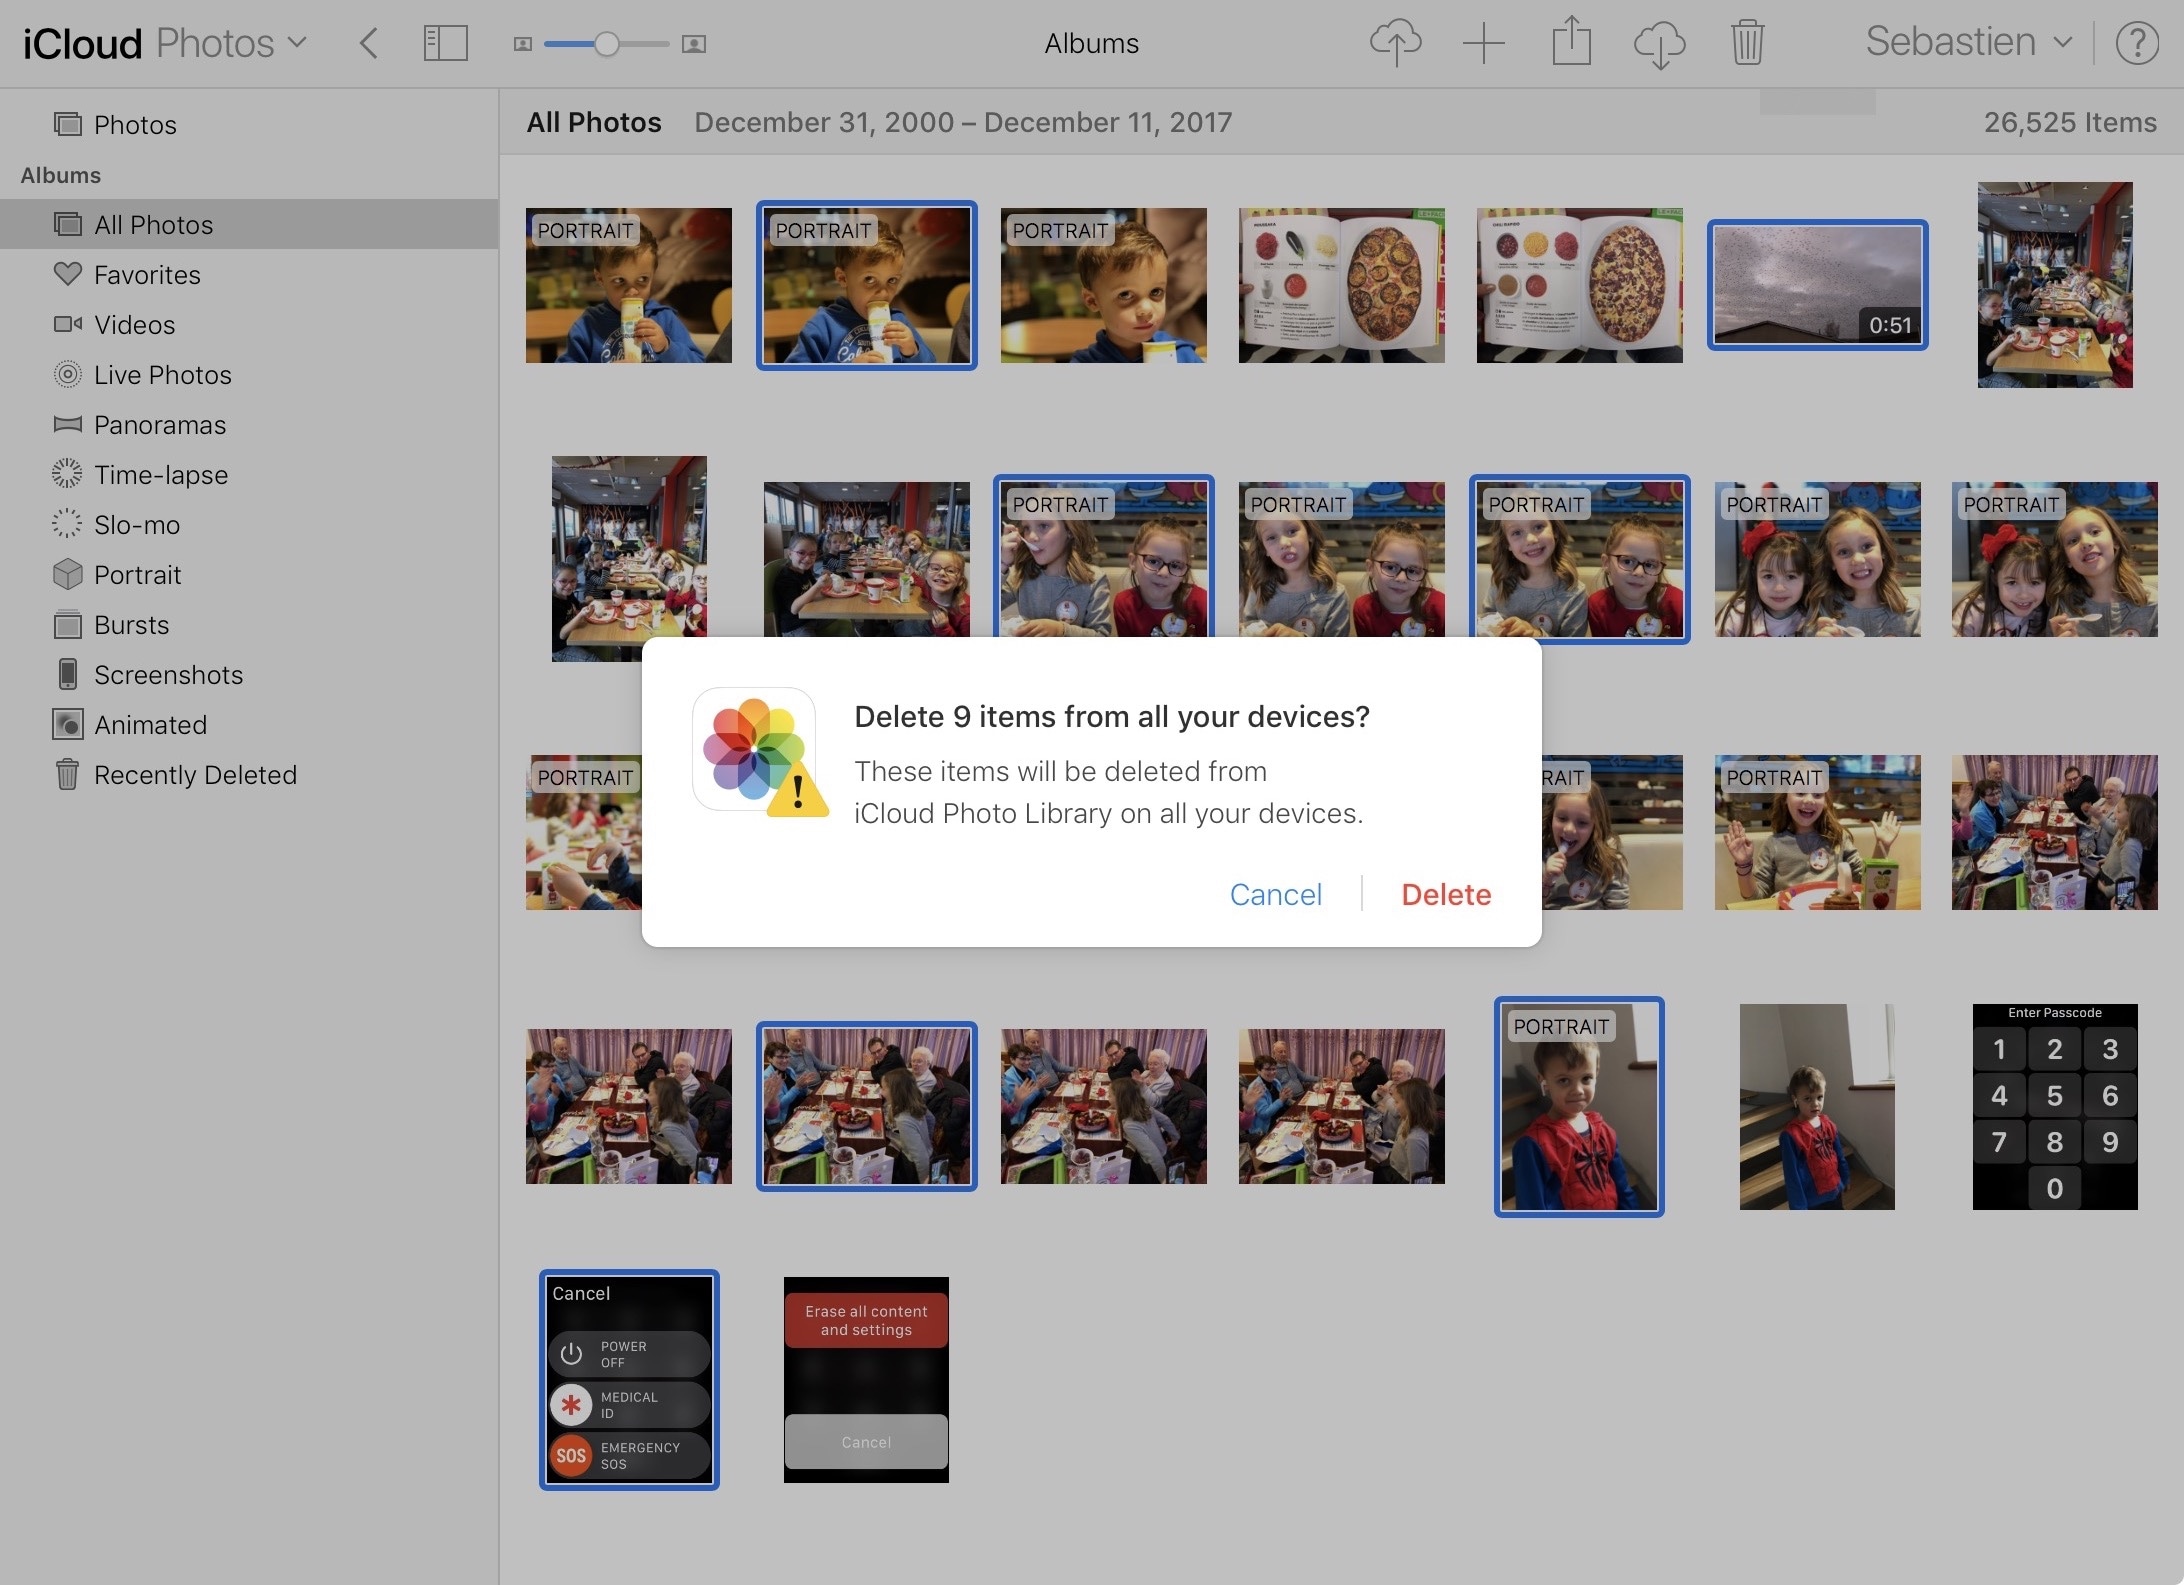 How to delete multiple pictures at once in iCloud Photo Library from